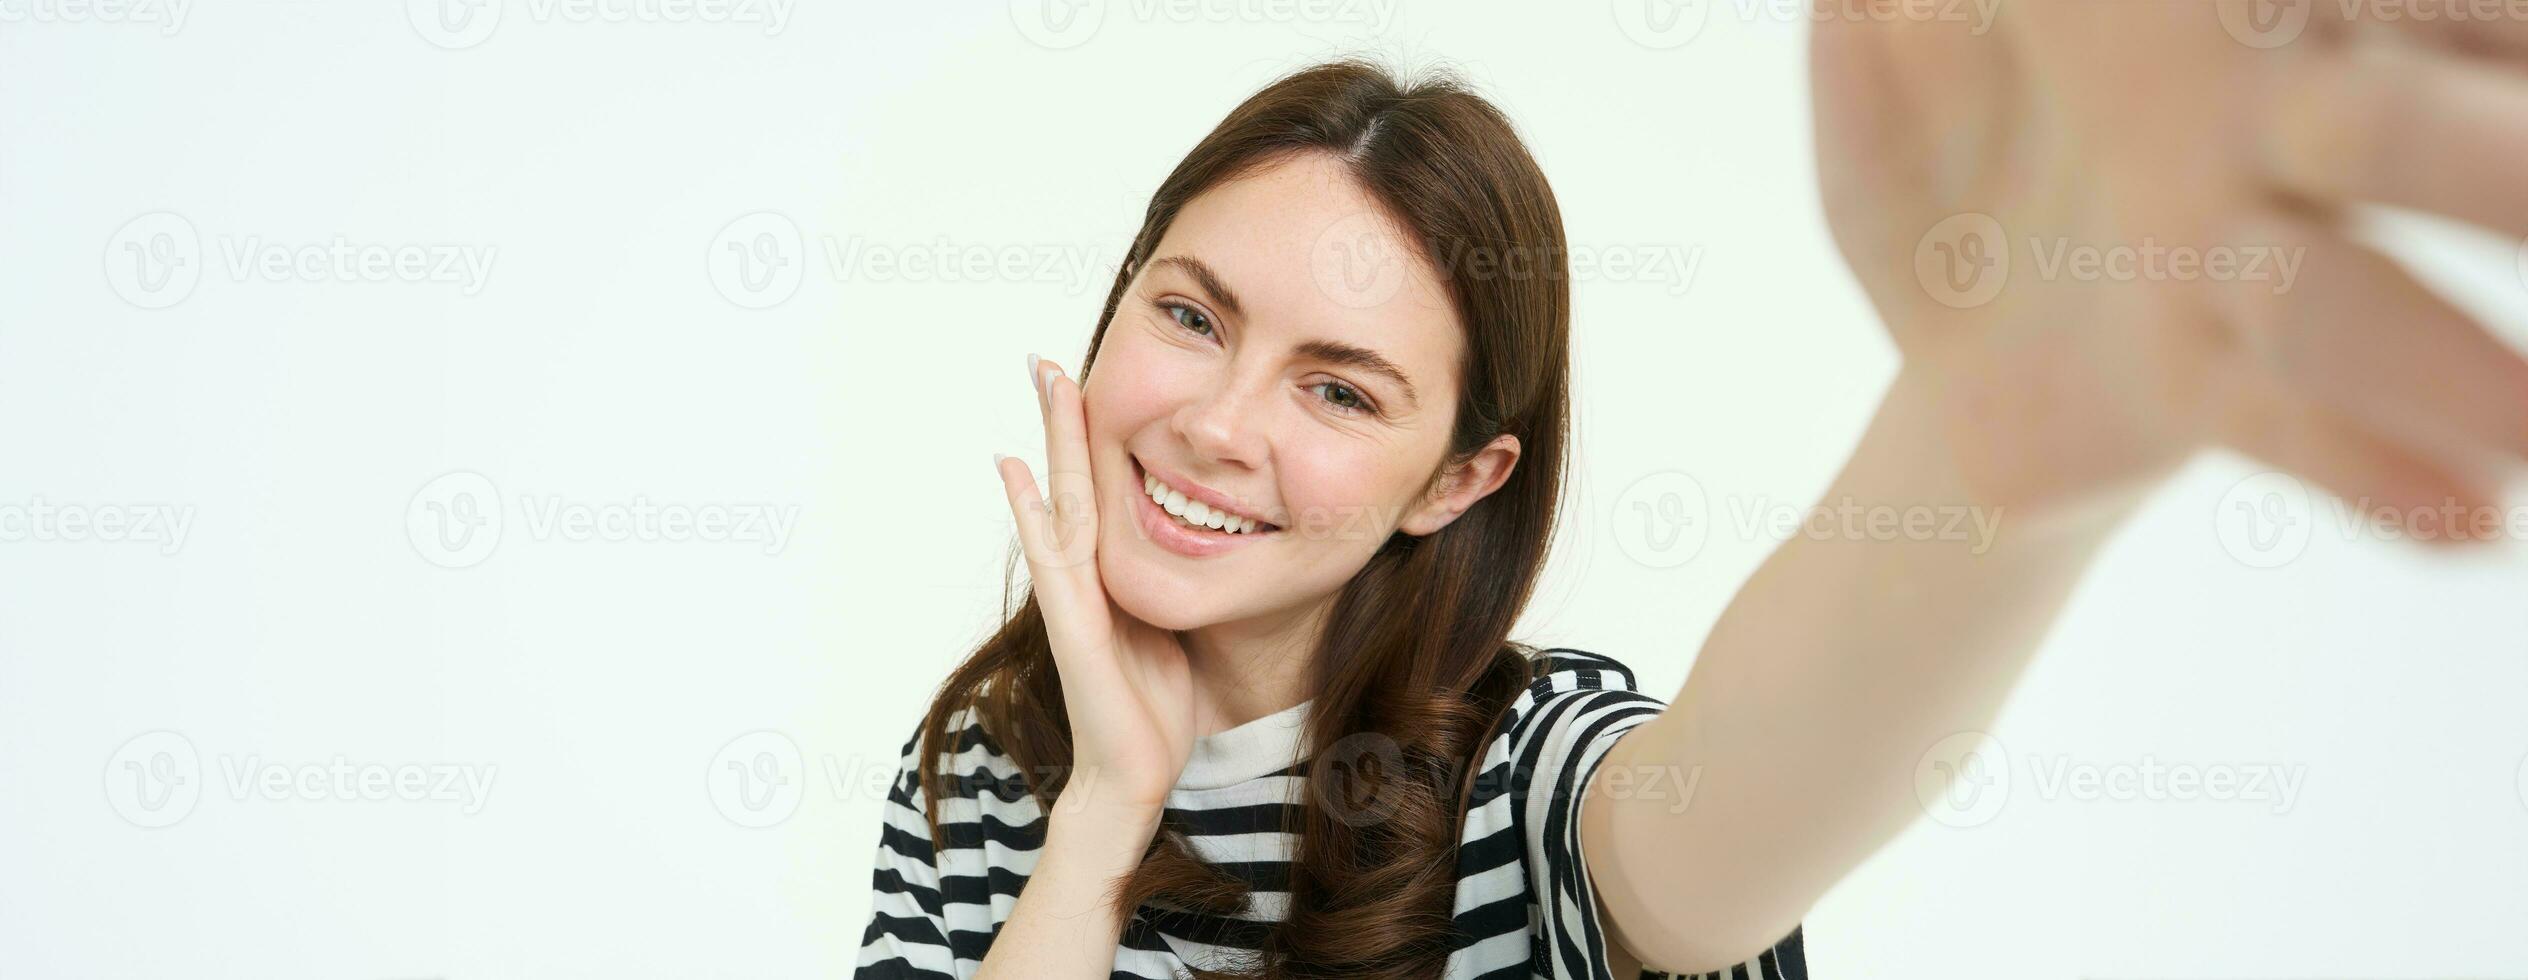 Lifestyle and people concept. Young carefree woman, smiling while taking selfie on smartphone, posing for photo, standing over white background photo